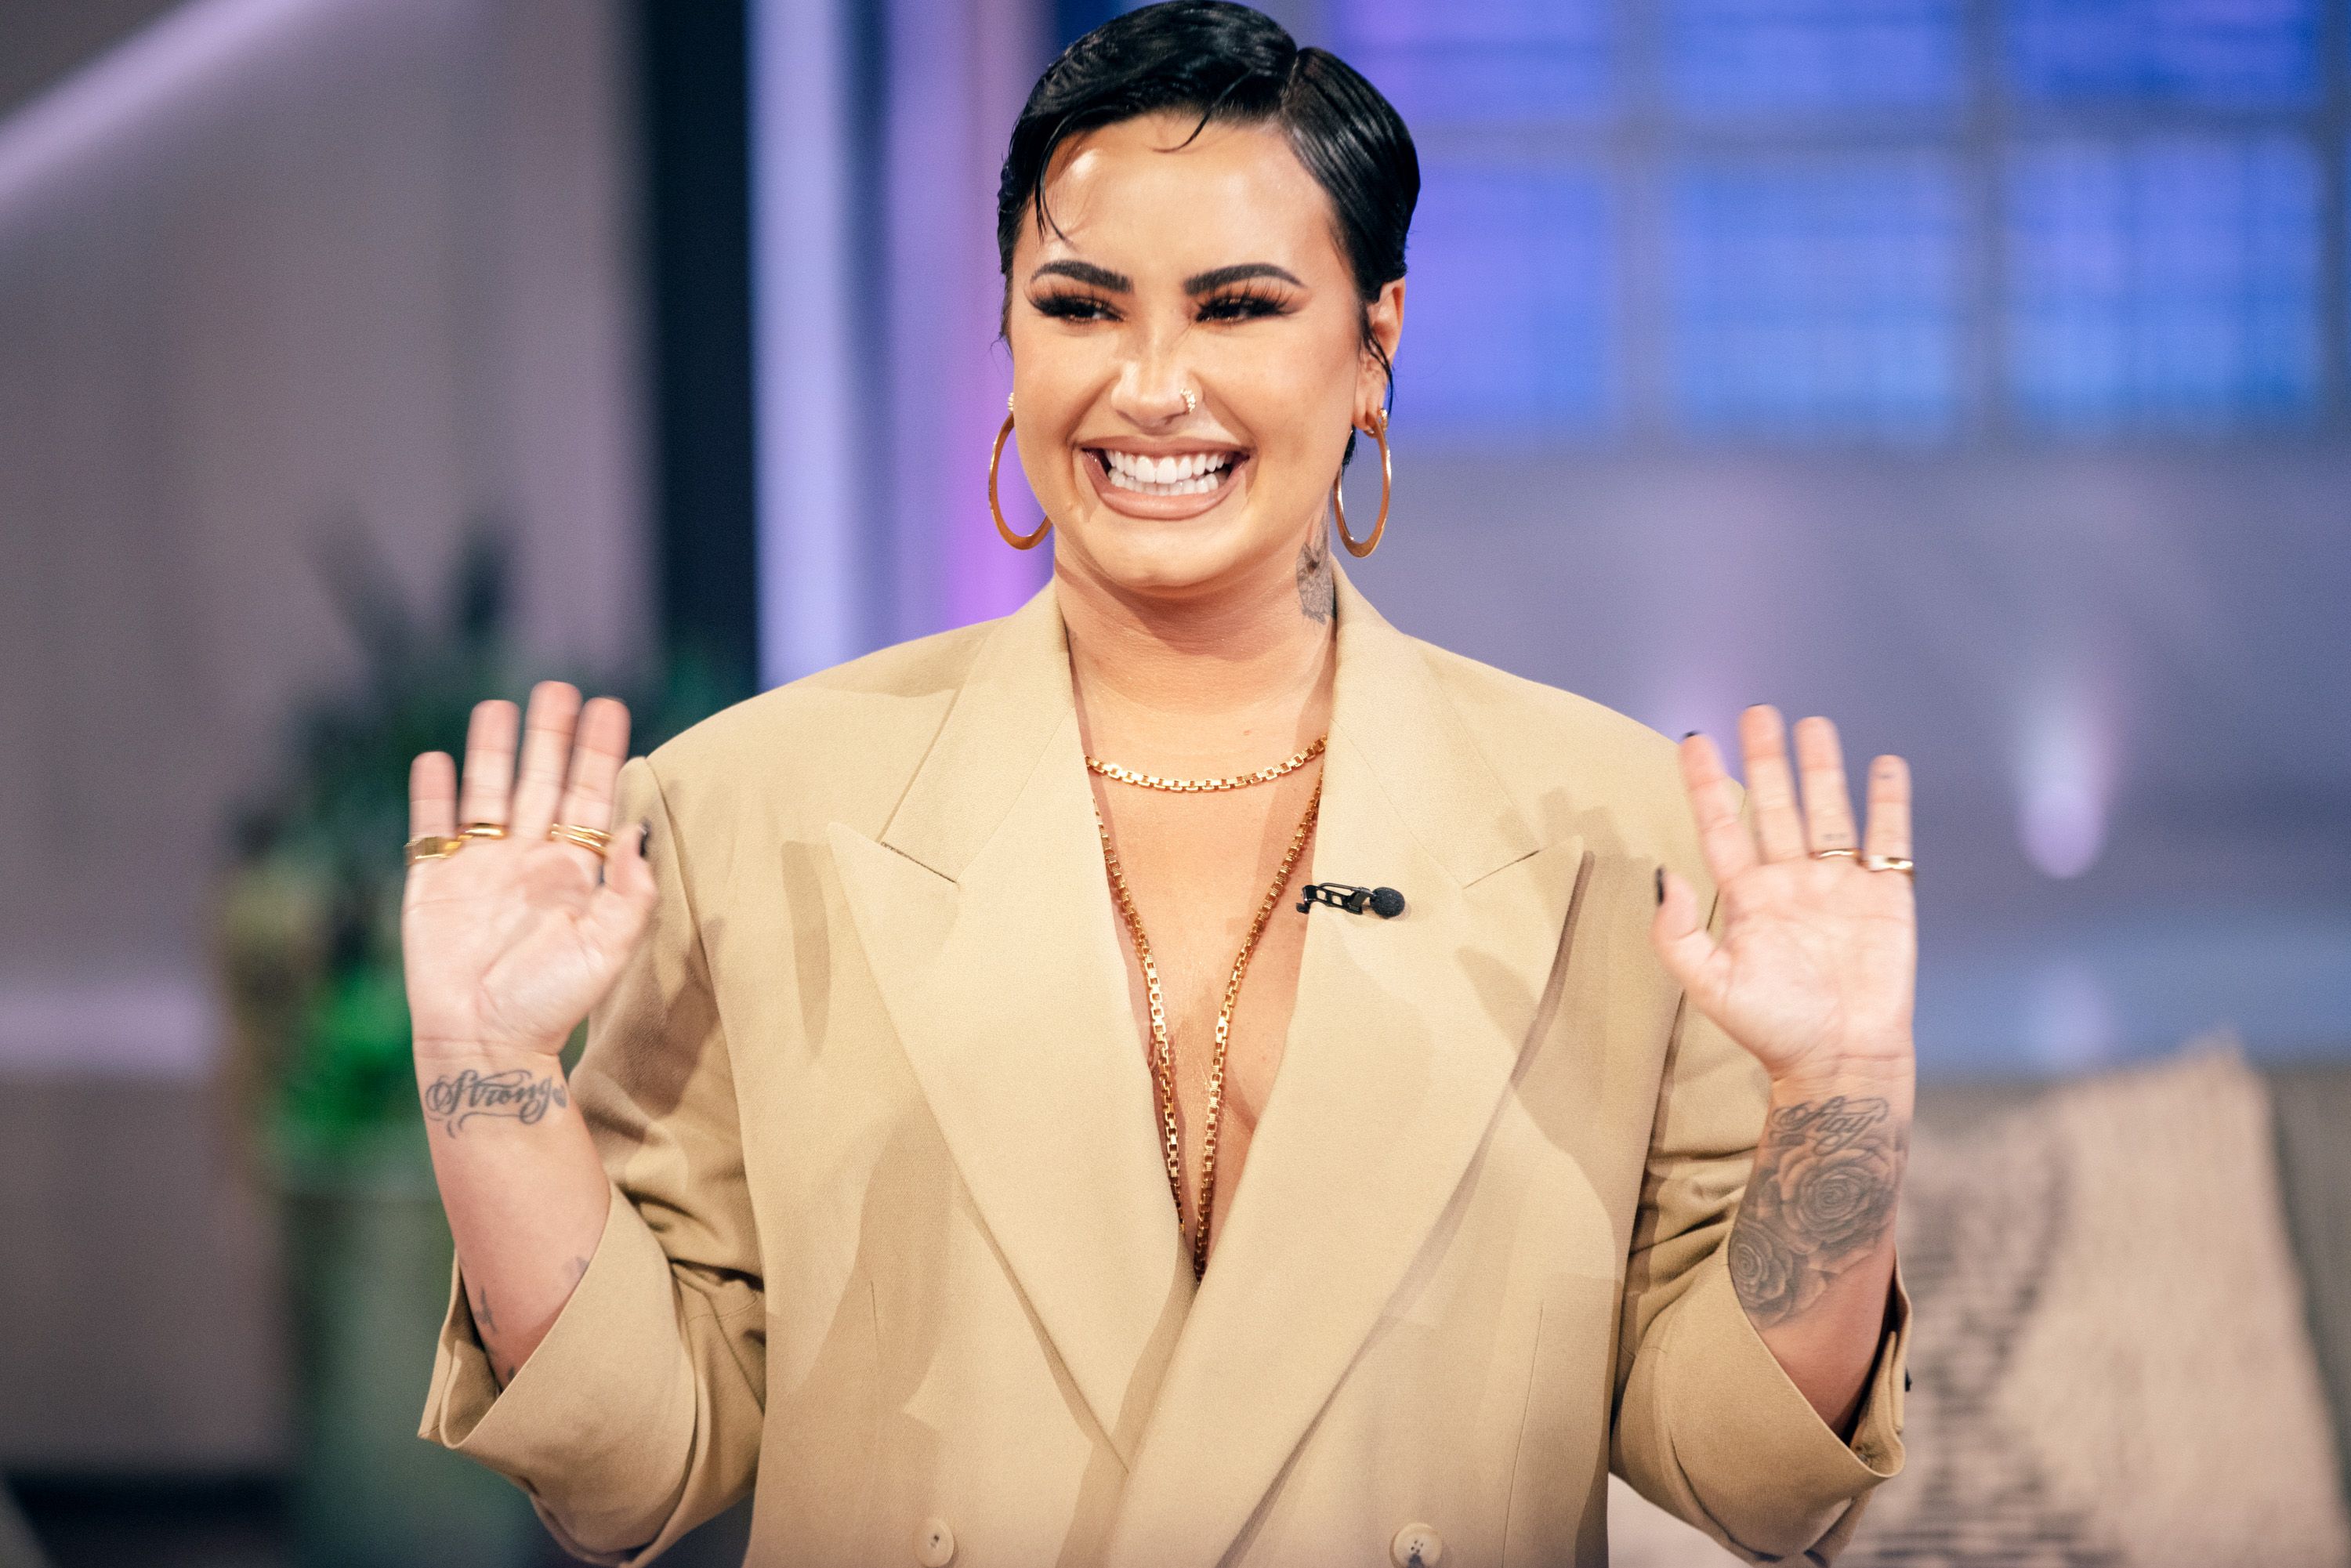 Demi Lovato's 20+ Tattoos and Their Meanings: A Complete Guide